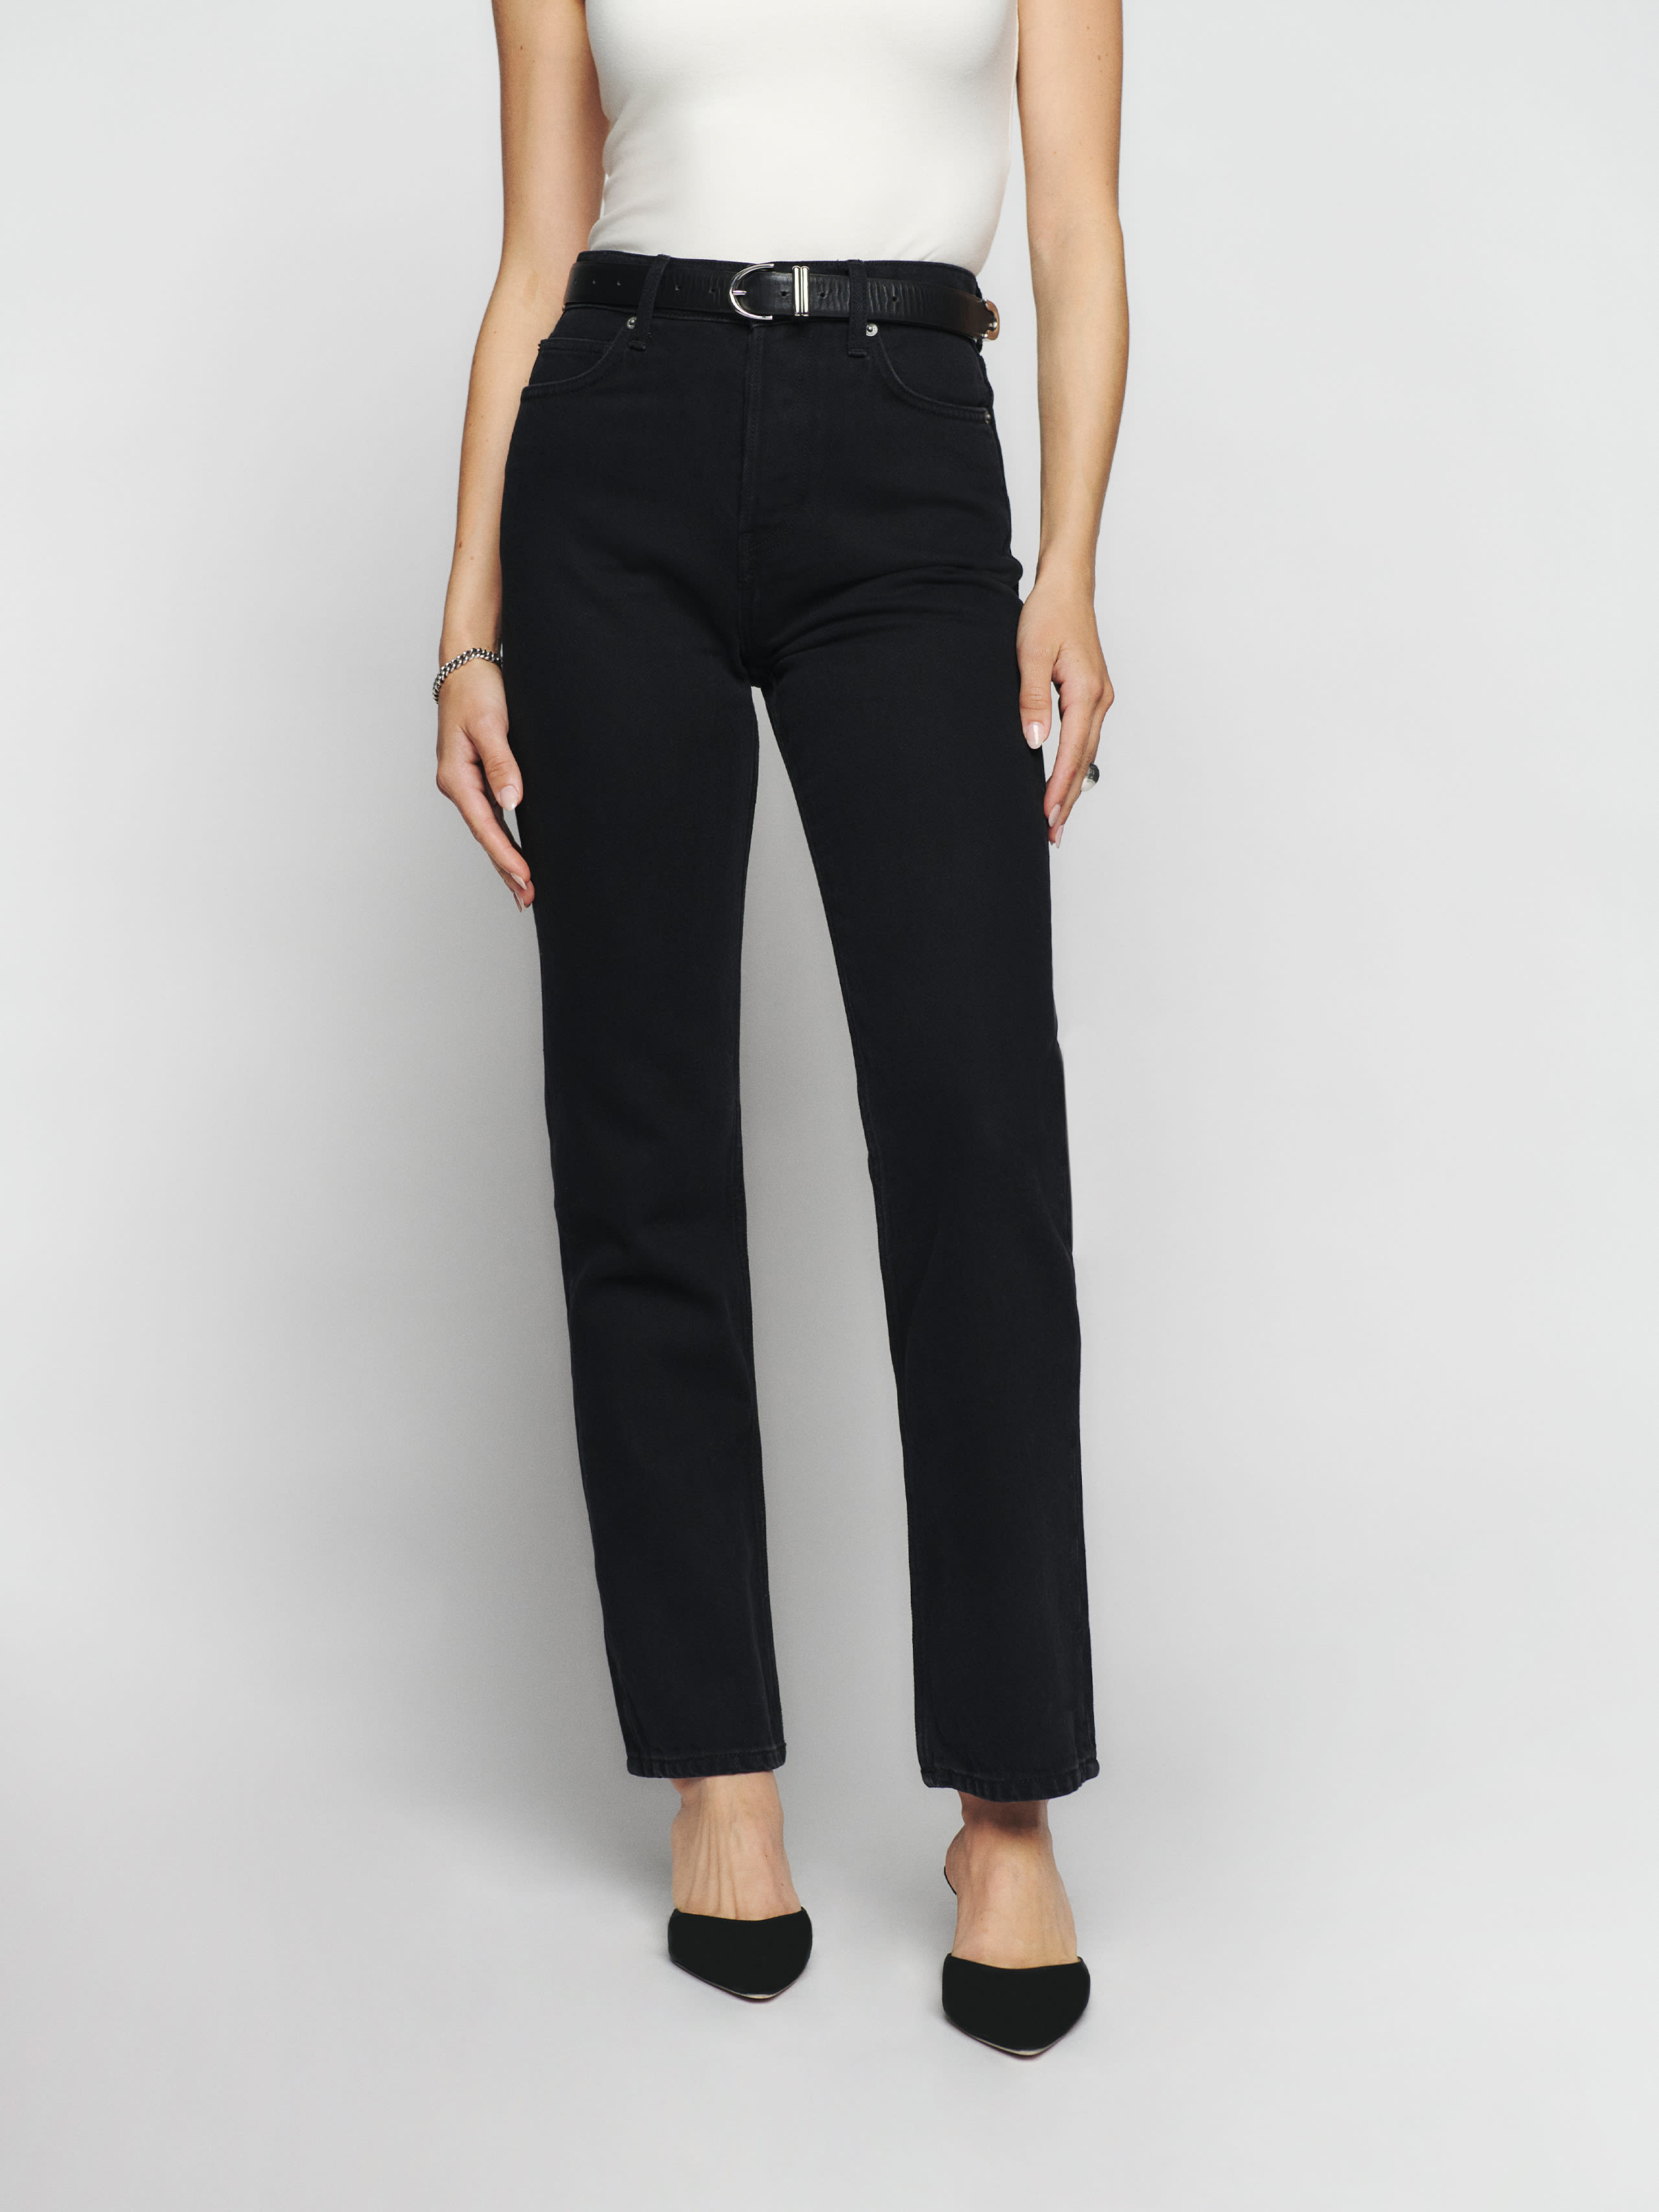 Cynthia High Rise Straight Jeans, image 1